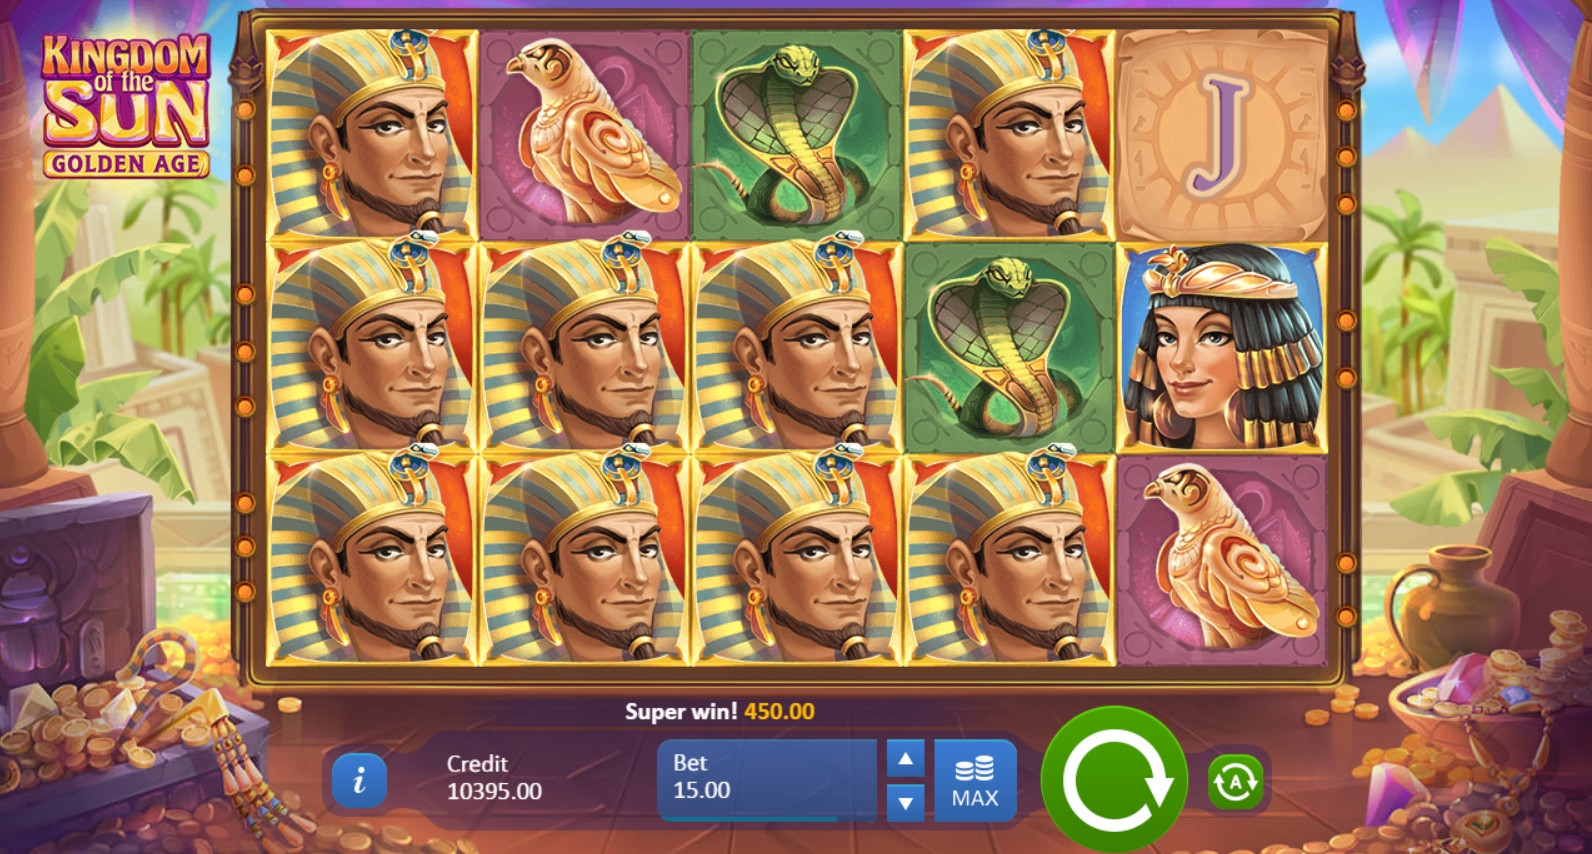 Kingdom of the Sun: Golden Age (Kingdom of the Sun: Golden Age) from category Slots